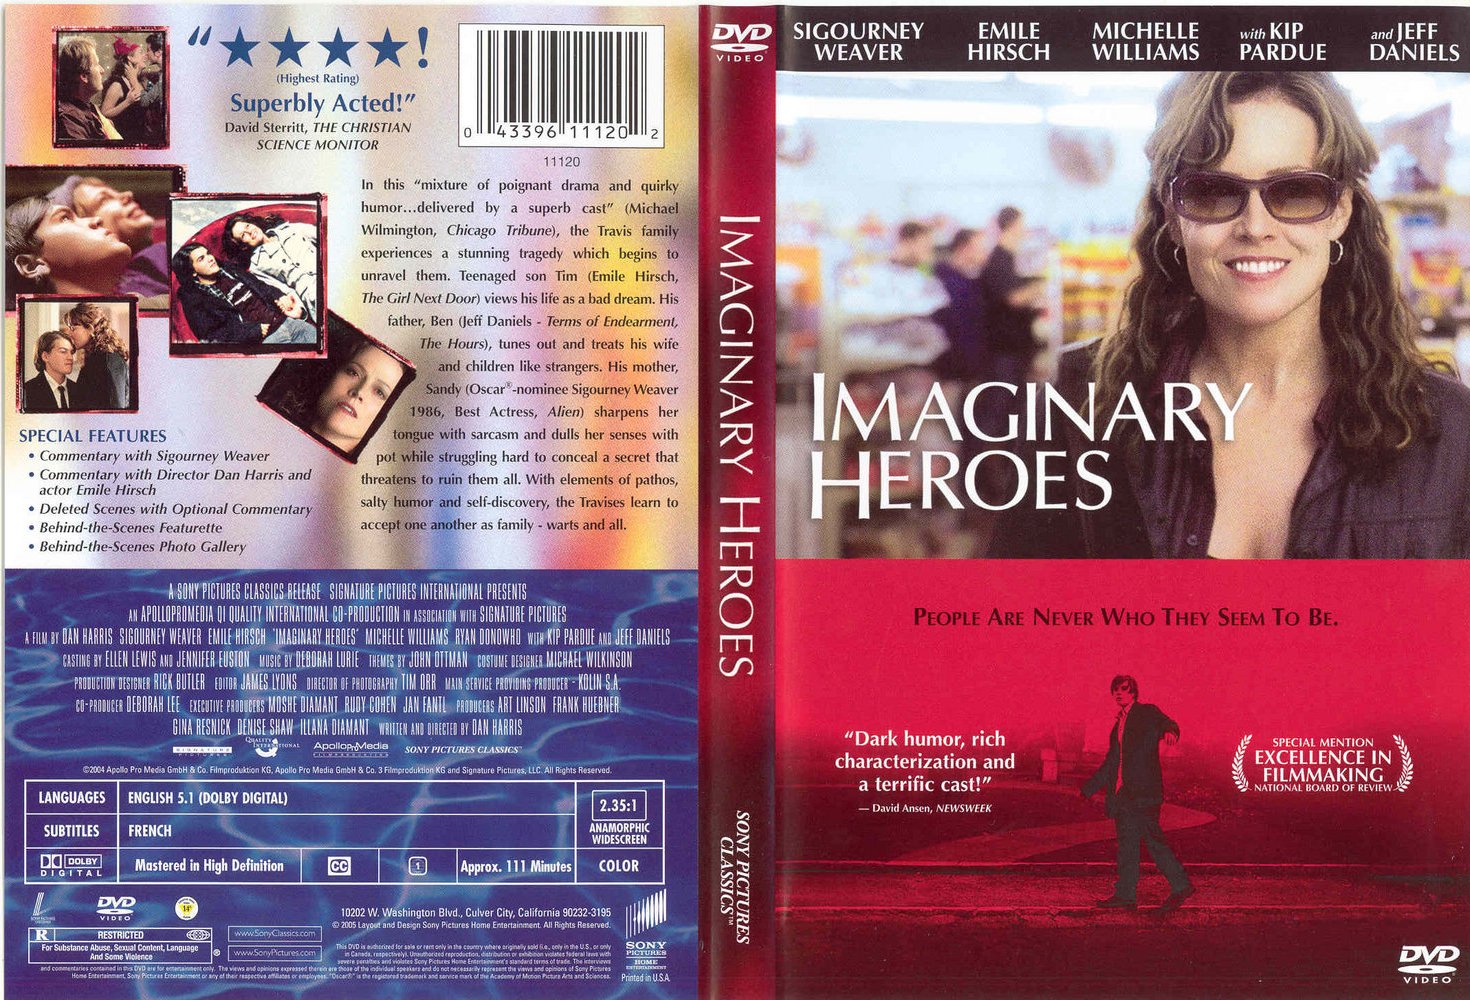 Jaquette DVD Imaginary heroes Zone 1